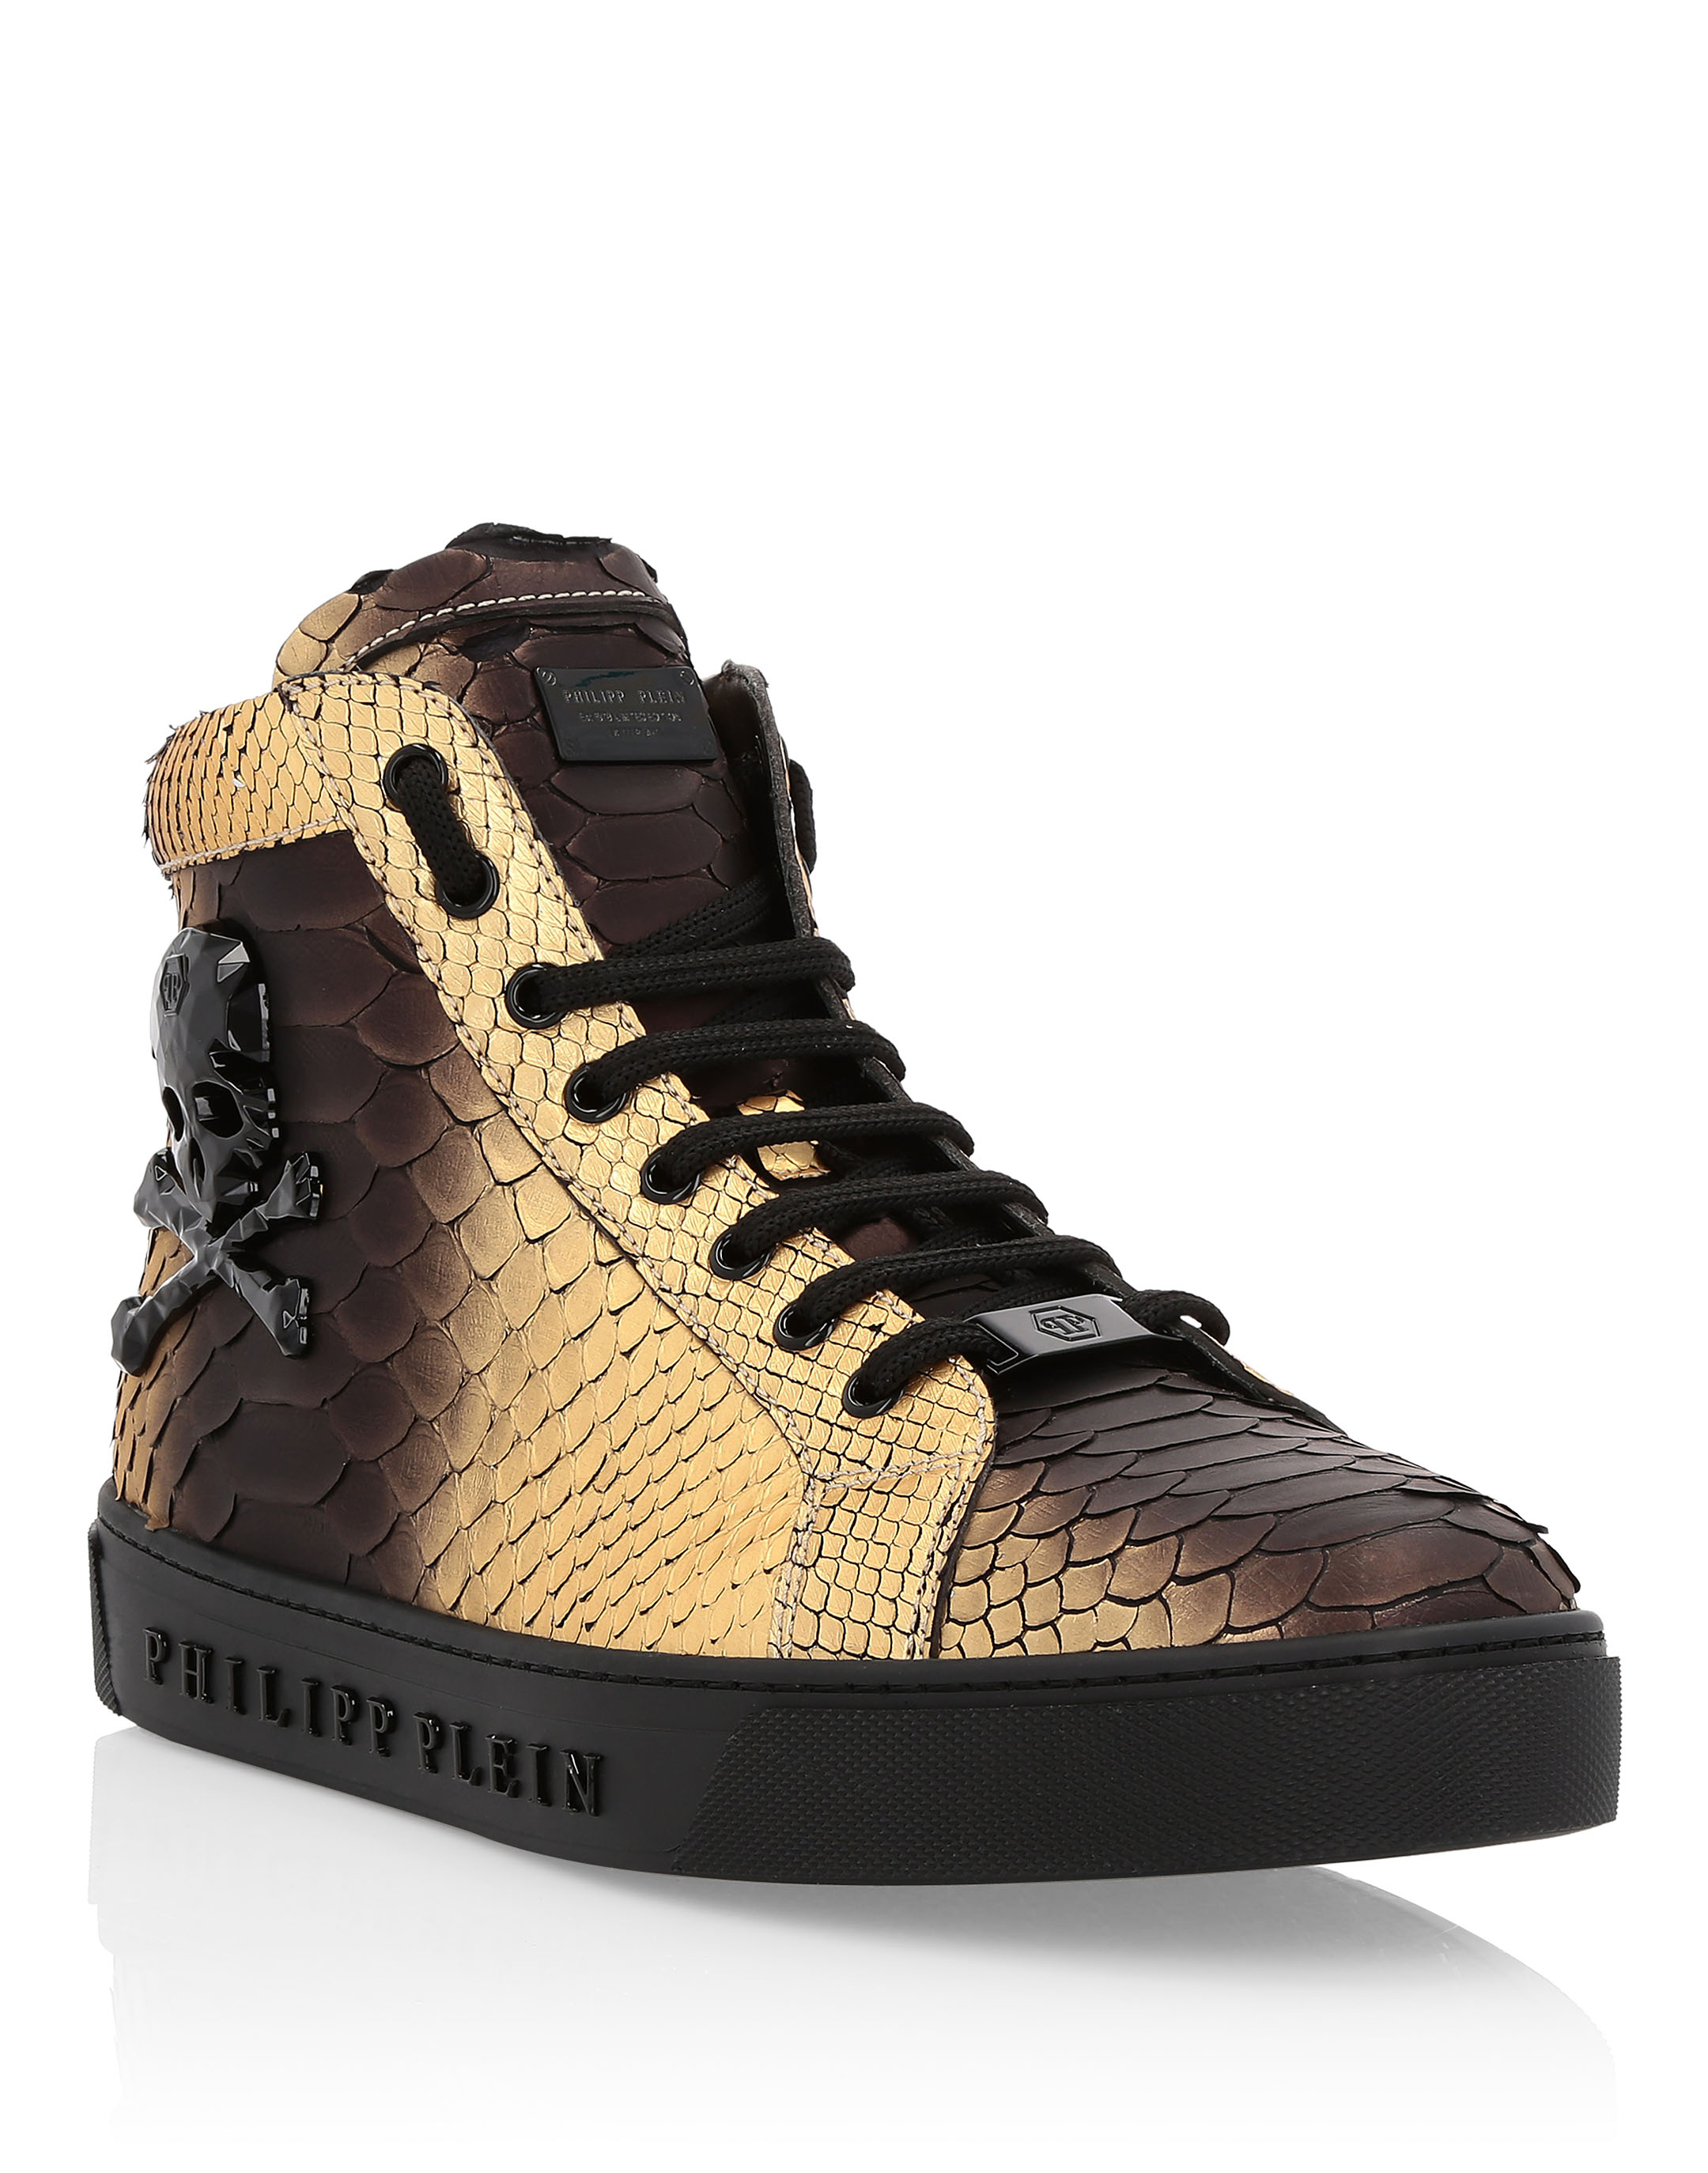 Hi-Top Sneakers a | Philipp Plein Outlet